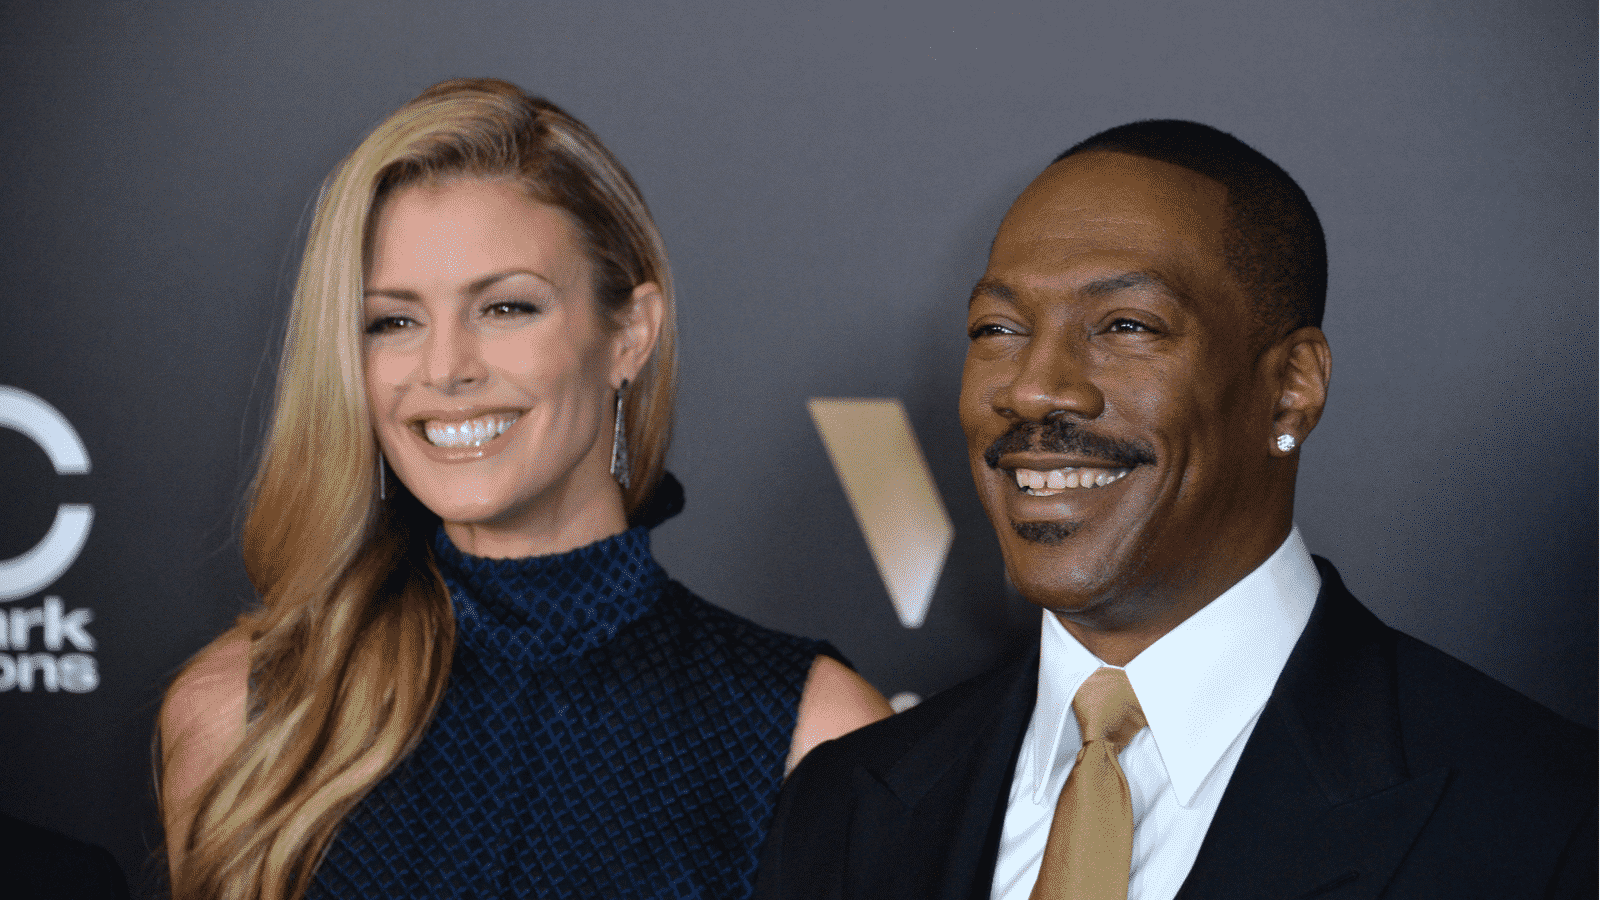 BEVERLY HILLS, CA. November 6, 2016: Actor Eddie Murphy & girlfriend Paige Butcher at the 2016 Hollywood Film Awards at the Beverly Hilton Hotel.